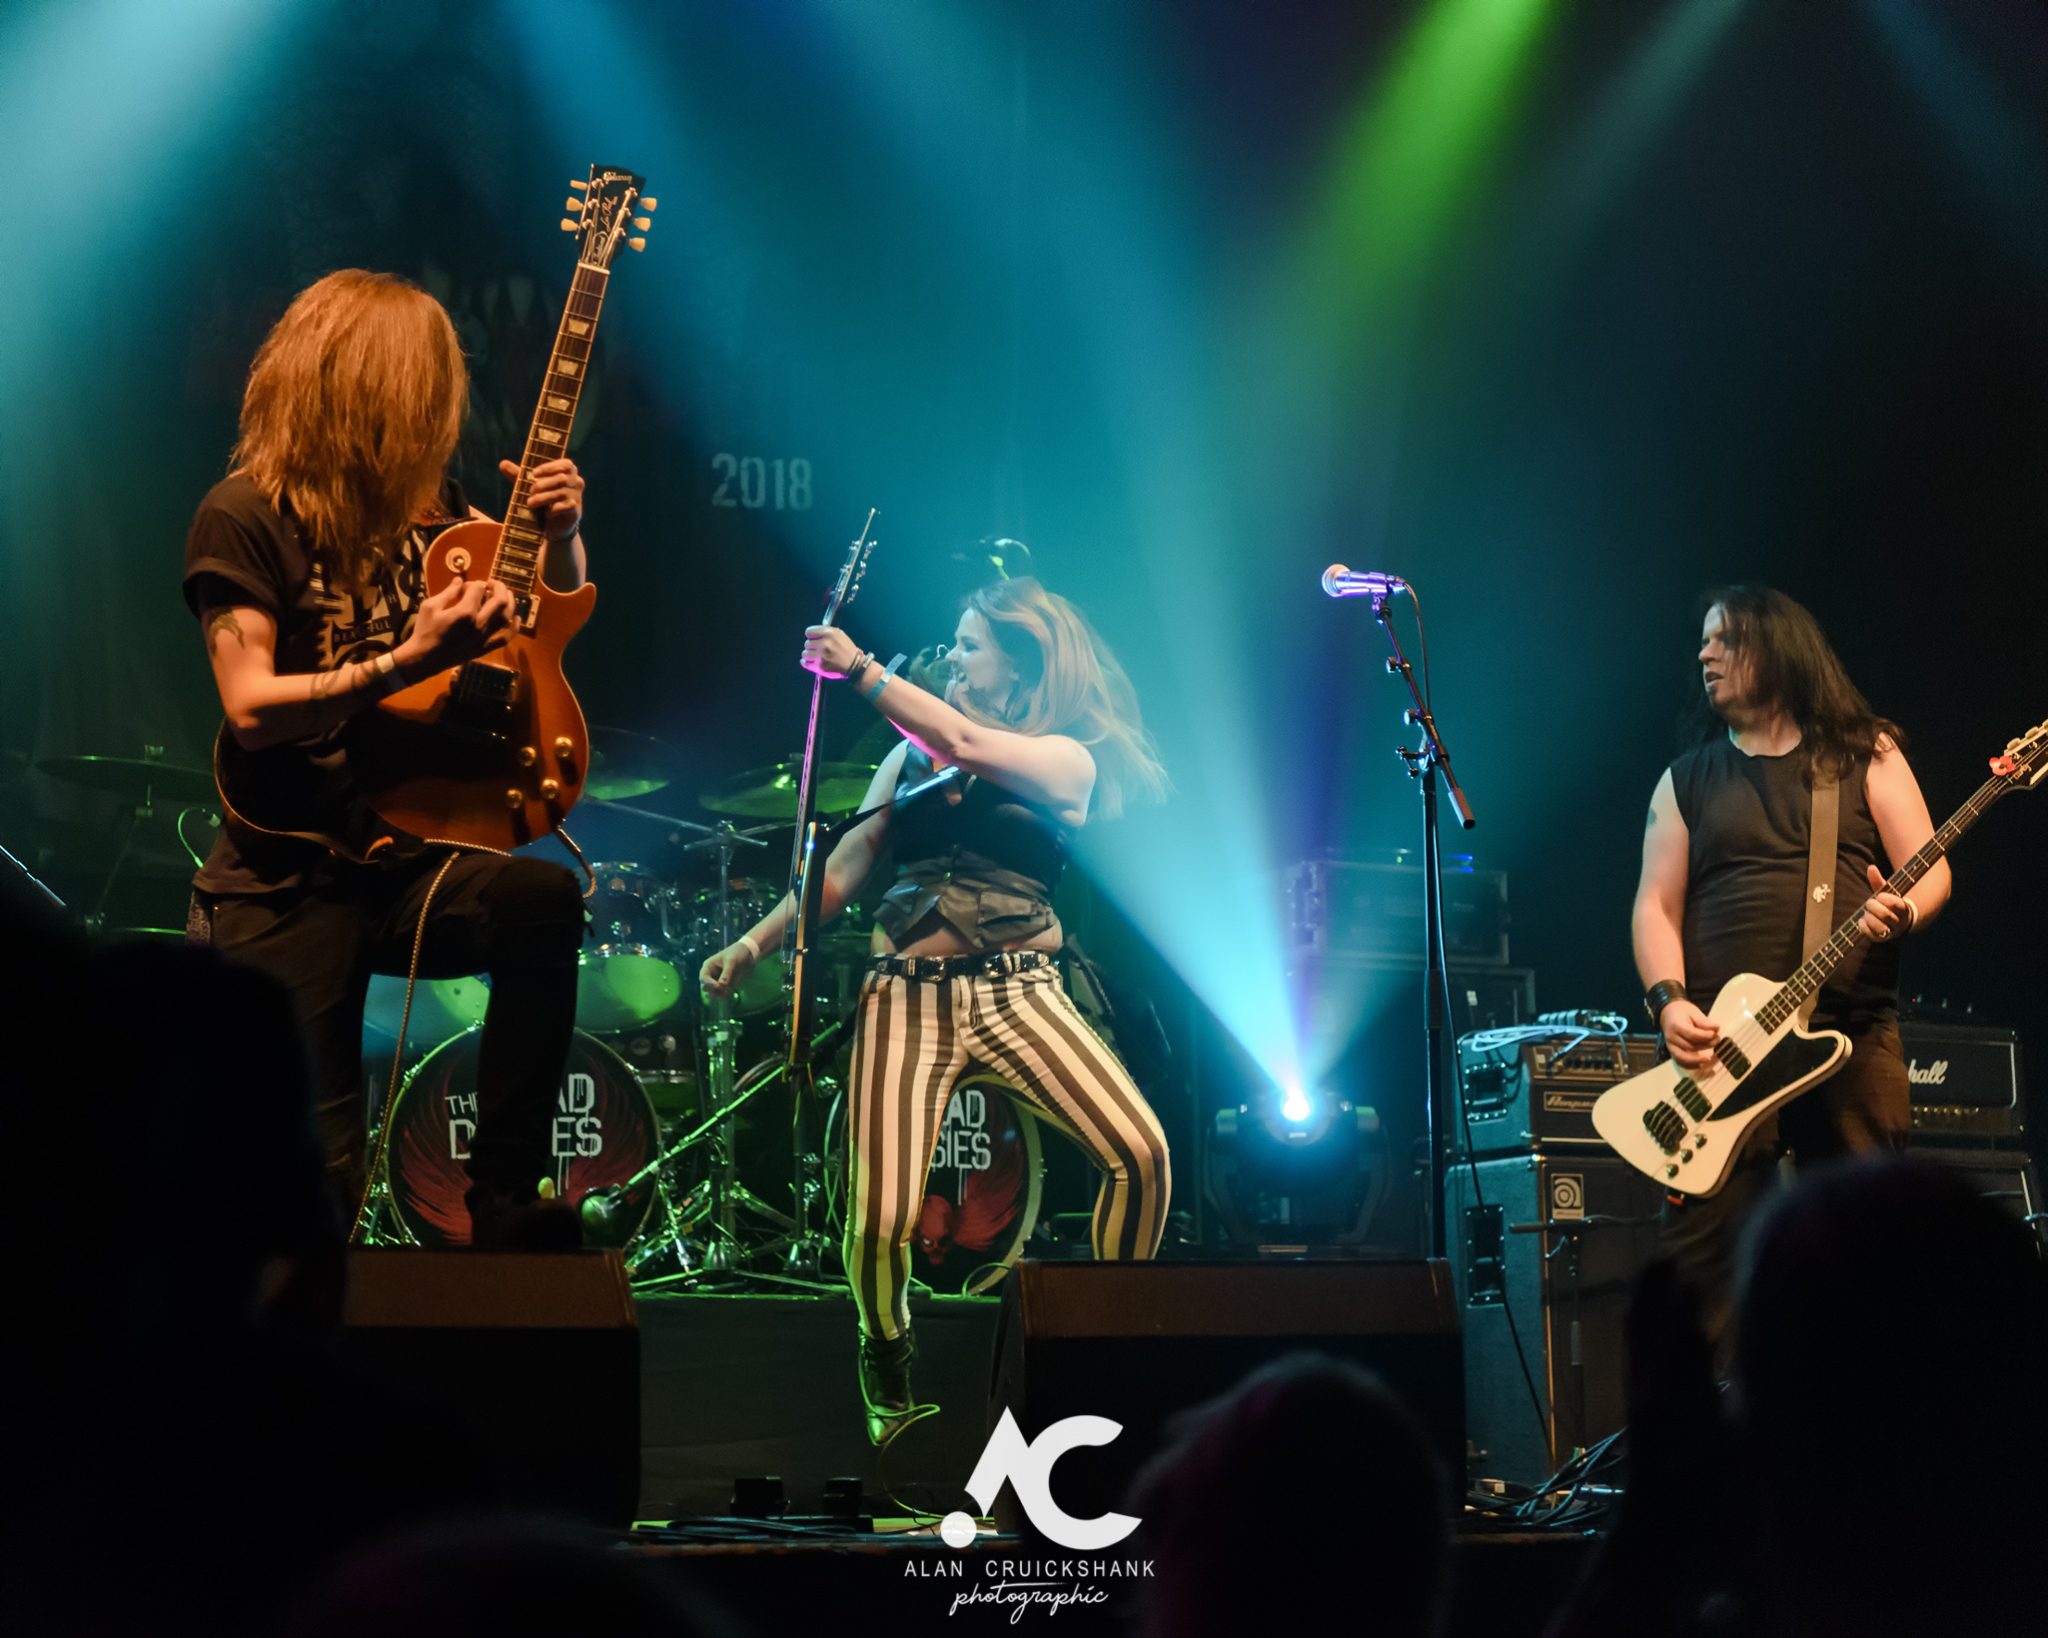 Beth Blade and the Beautiful Disasters at Monstersfest 2018 Ironworks Inverness November 2018 4 - Monstersfest 2018 - IMAGES